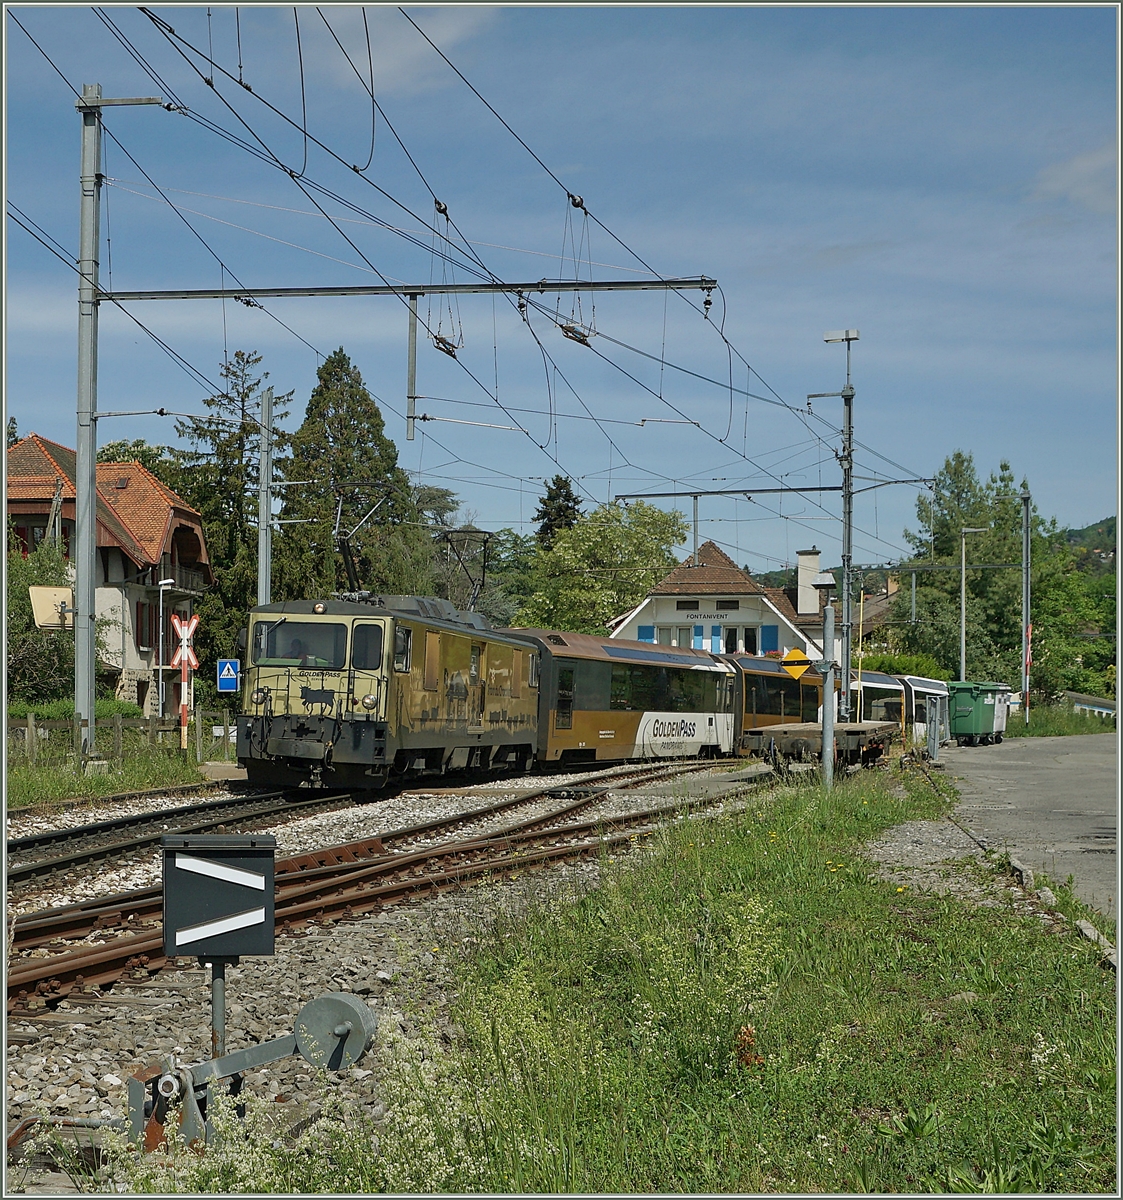 The MOB GDe 4/4 6003 with his Panoramic Express from Montreux to Zweisimmen in Fontanivent.

10.05.2020